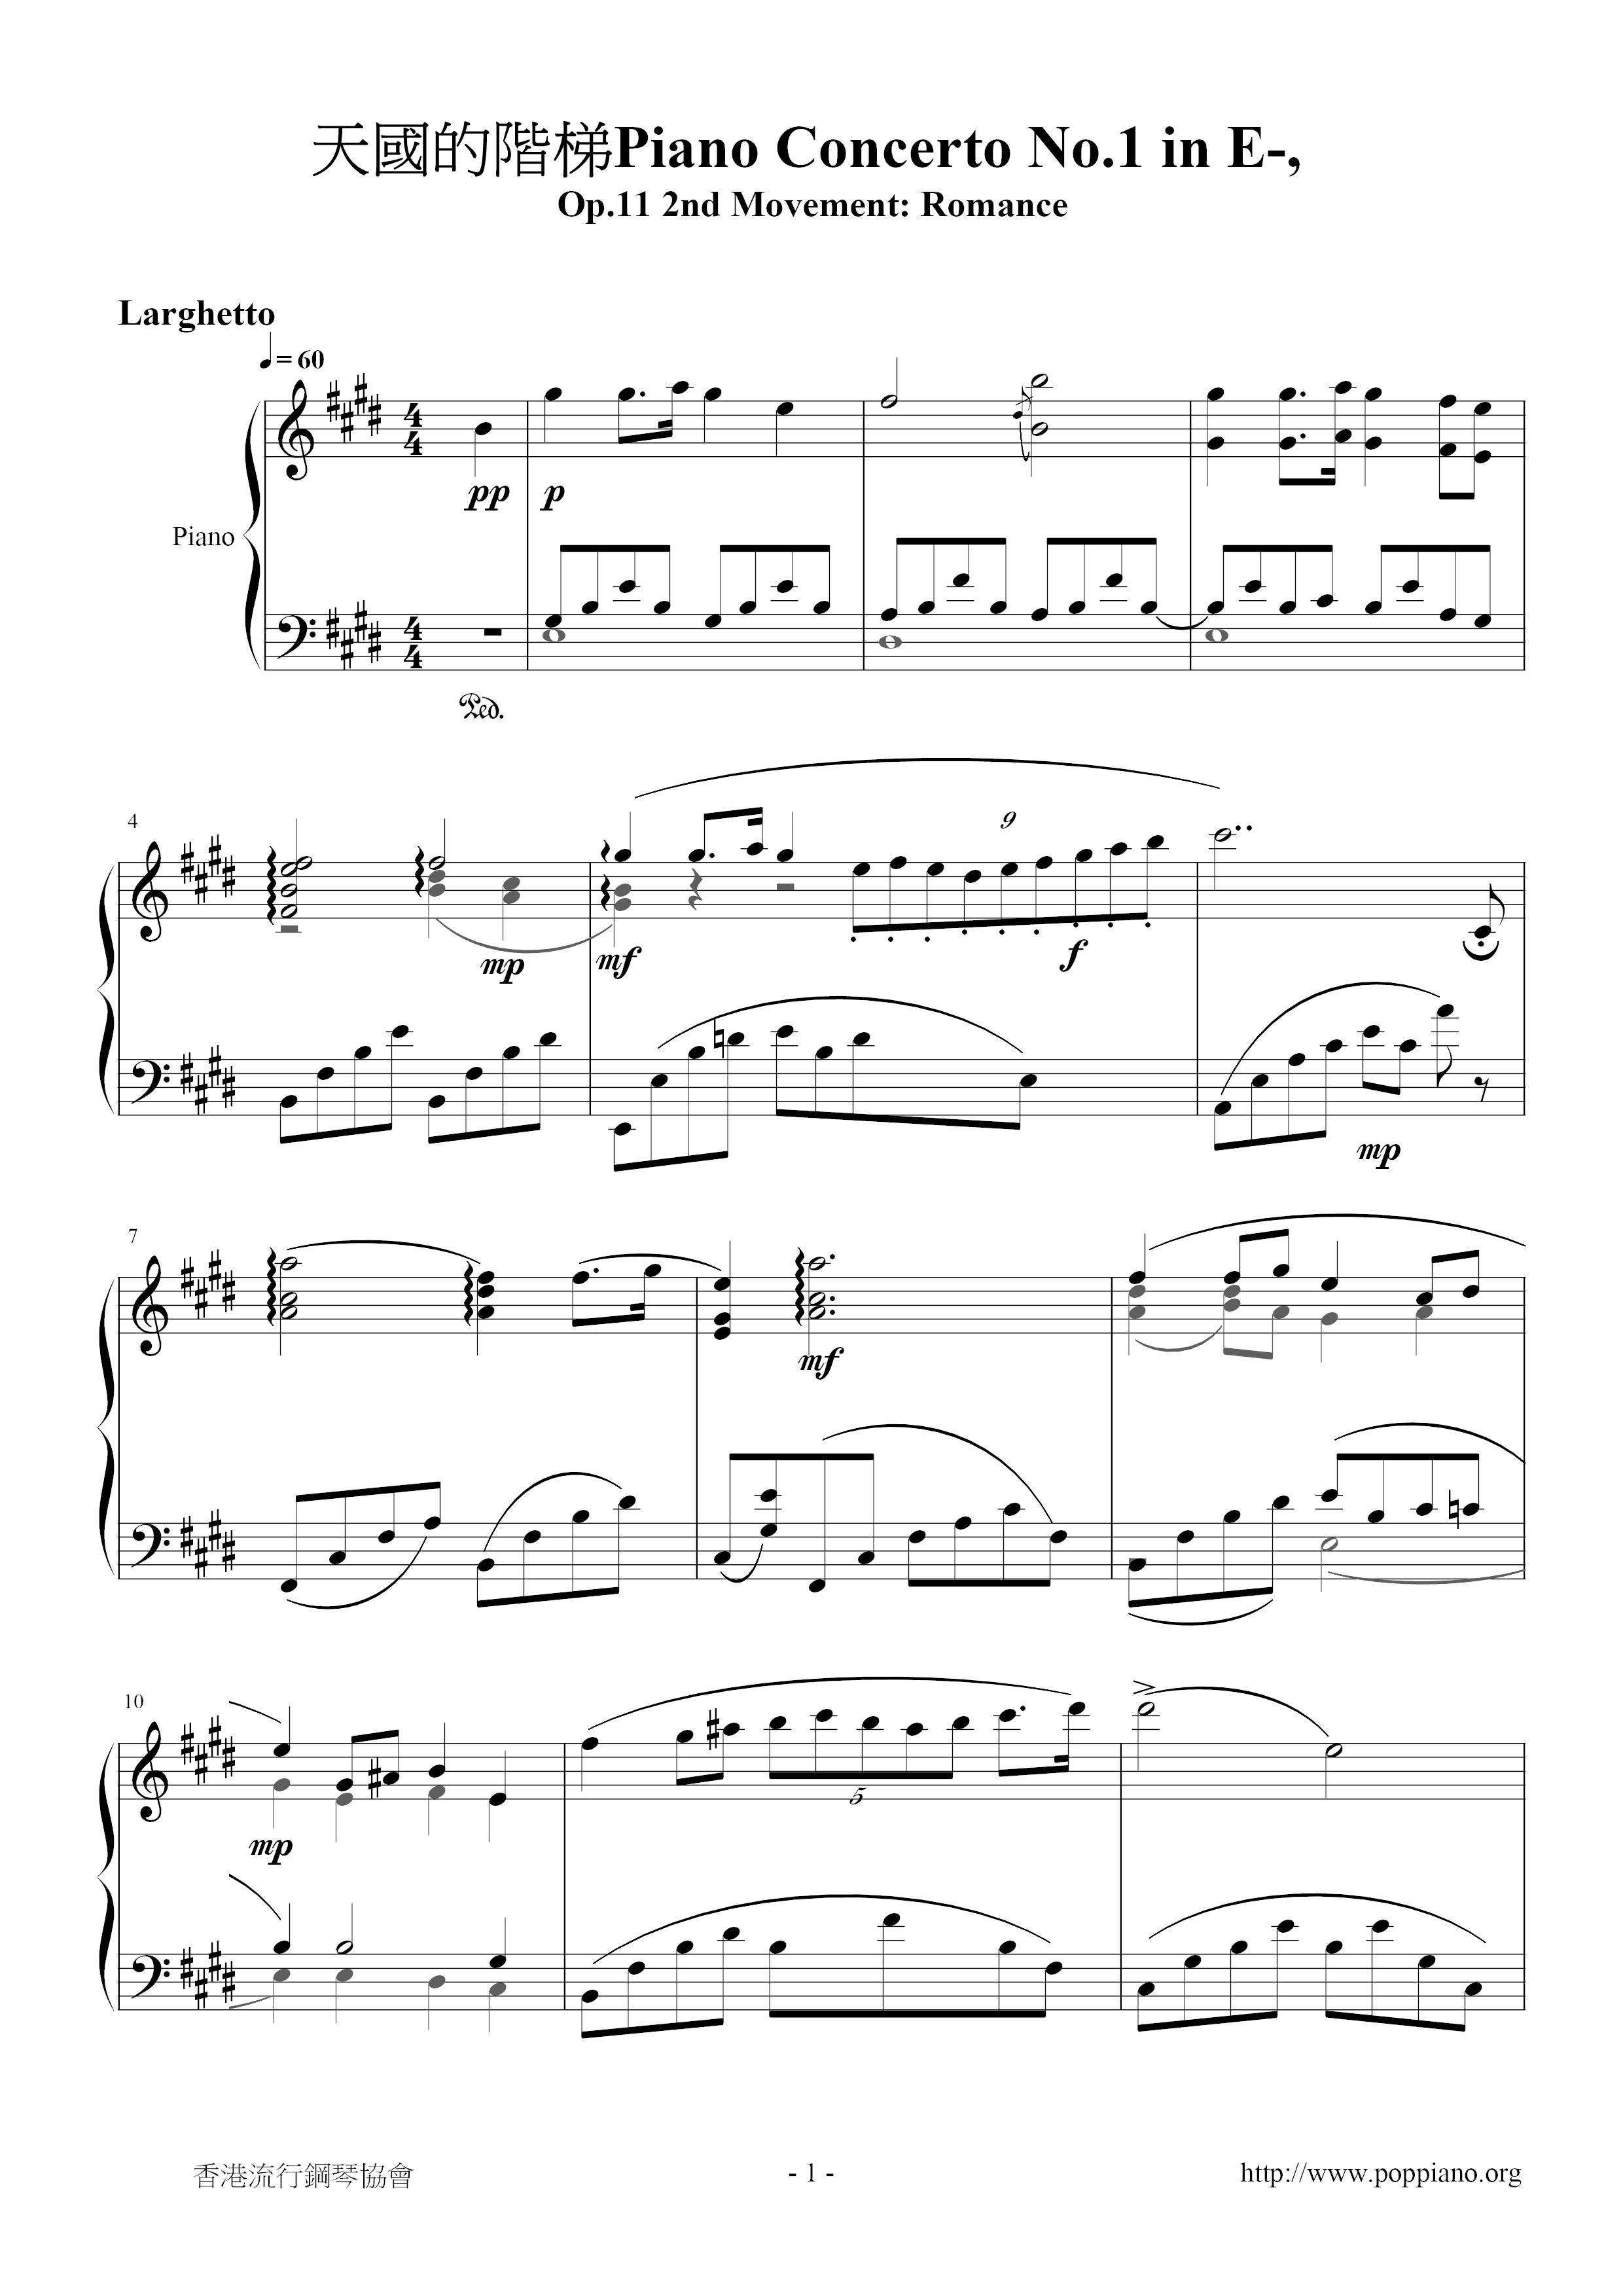 Stairway To Heaven Piano Concerto No.1 In E-, Op.11 2nd Movement: Romance Score